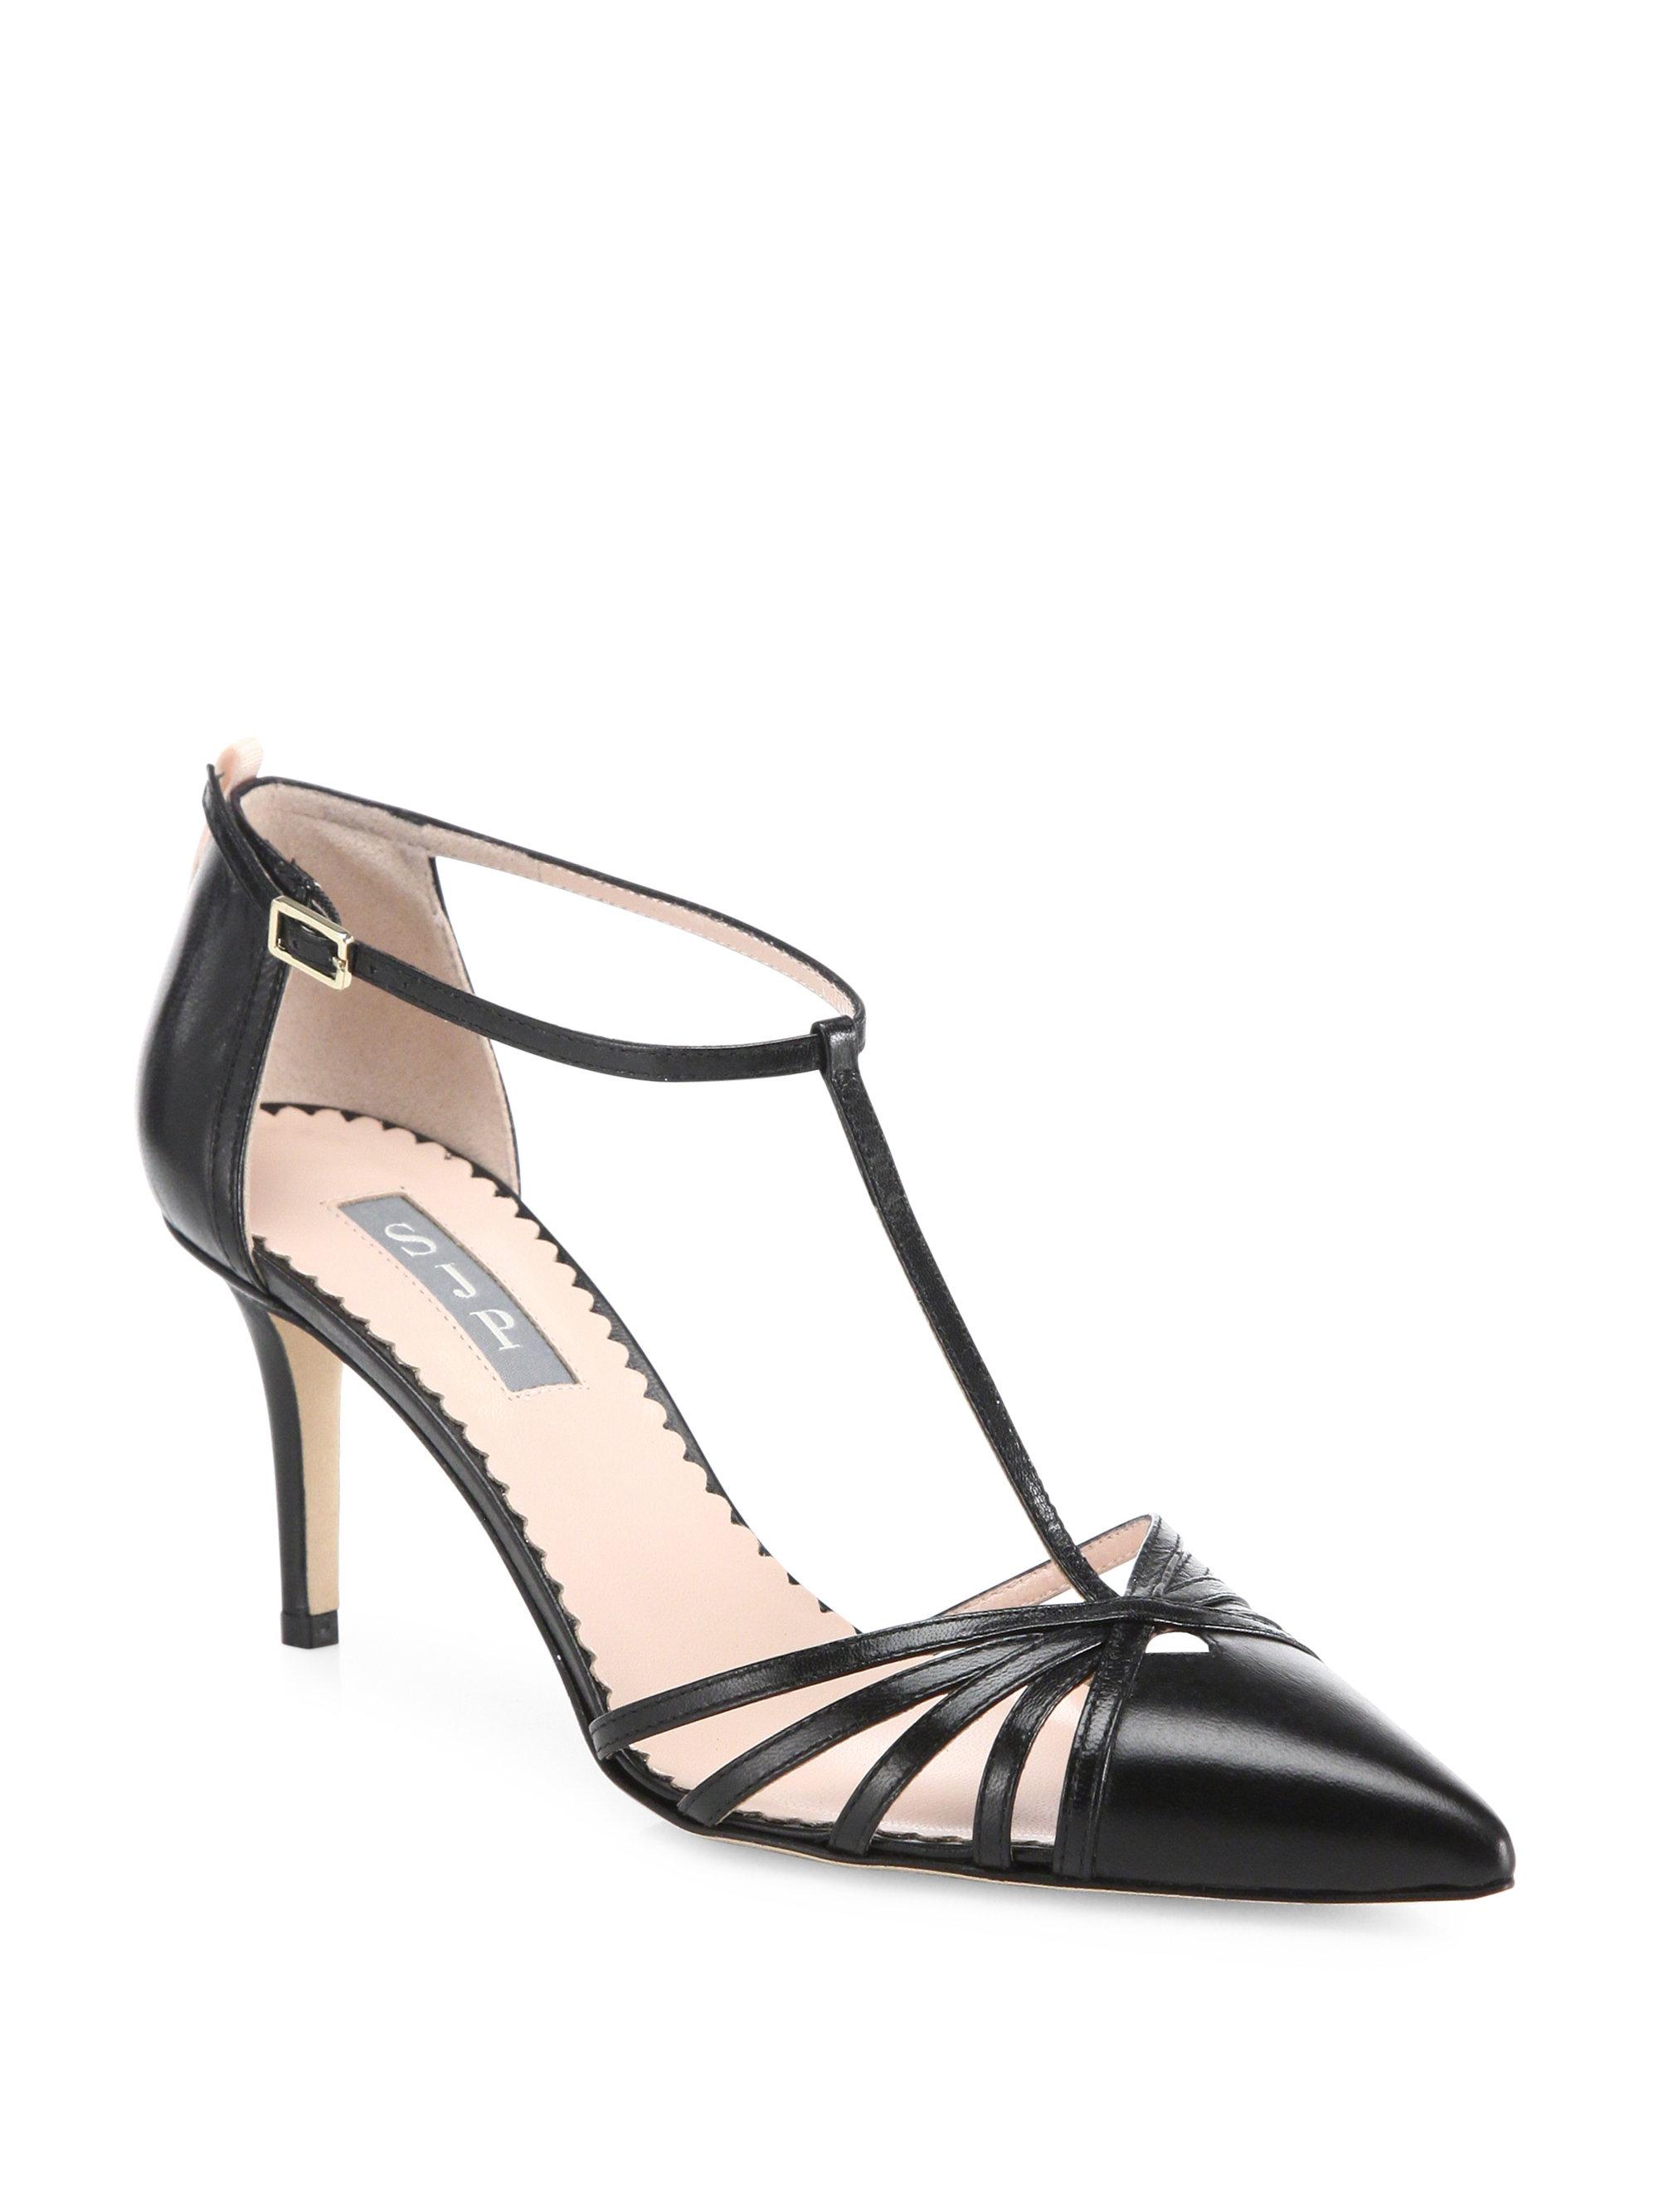 Lyst - Sjp By Sarah Jessica Parker Carrie 100 Stiletto Heel Court Shoes ...